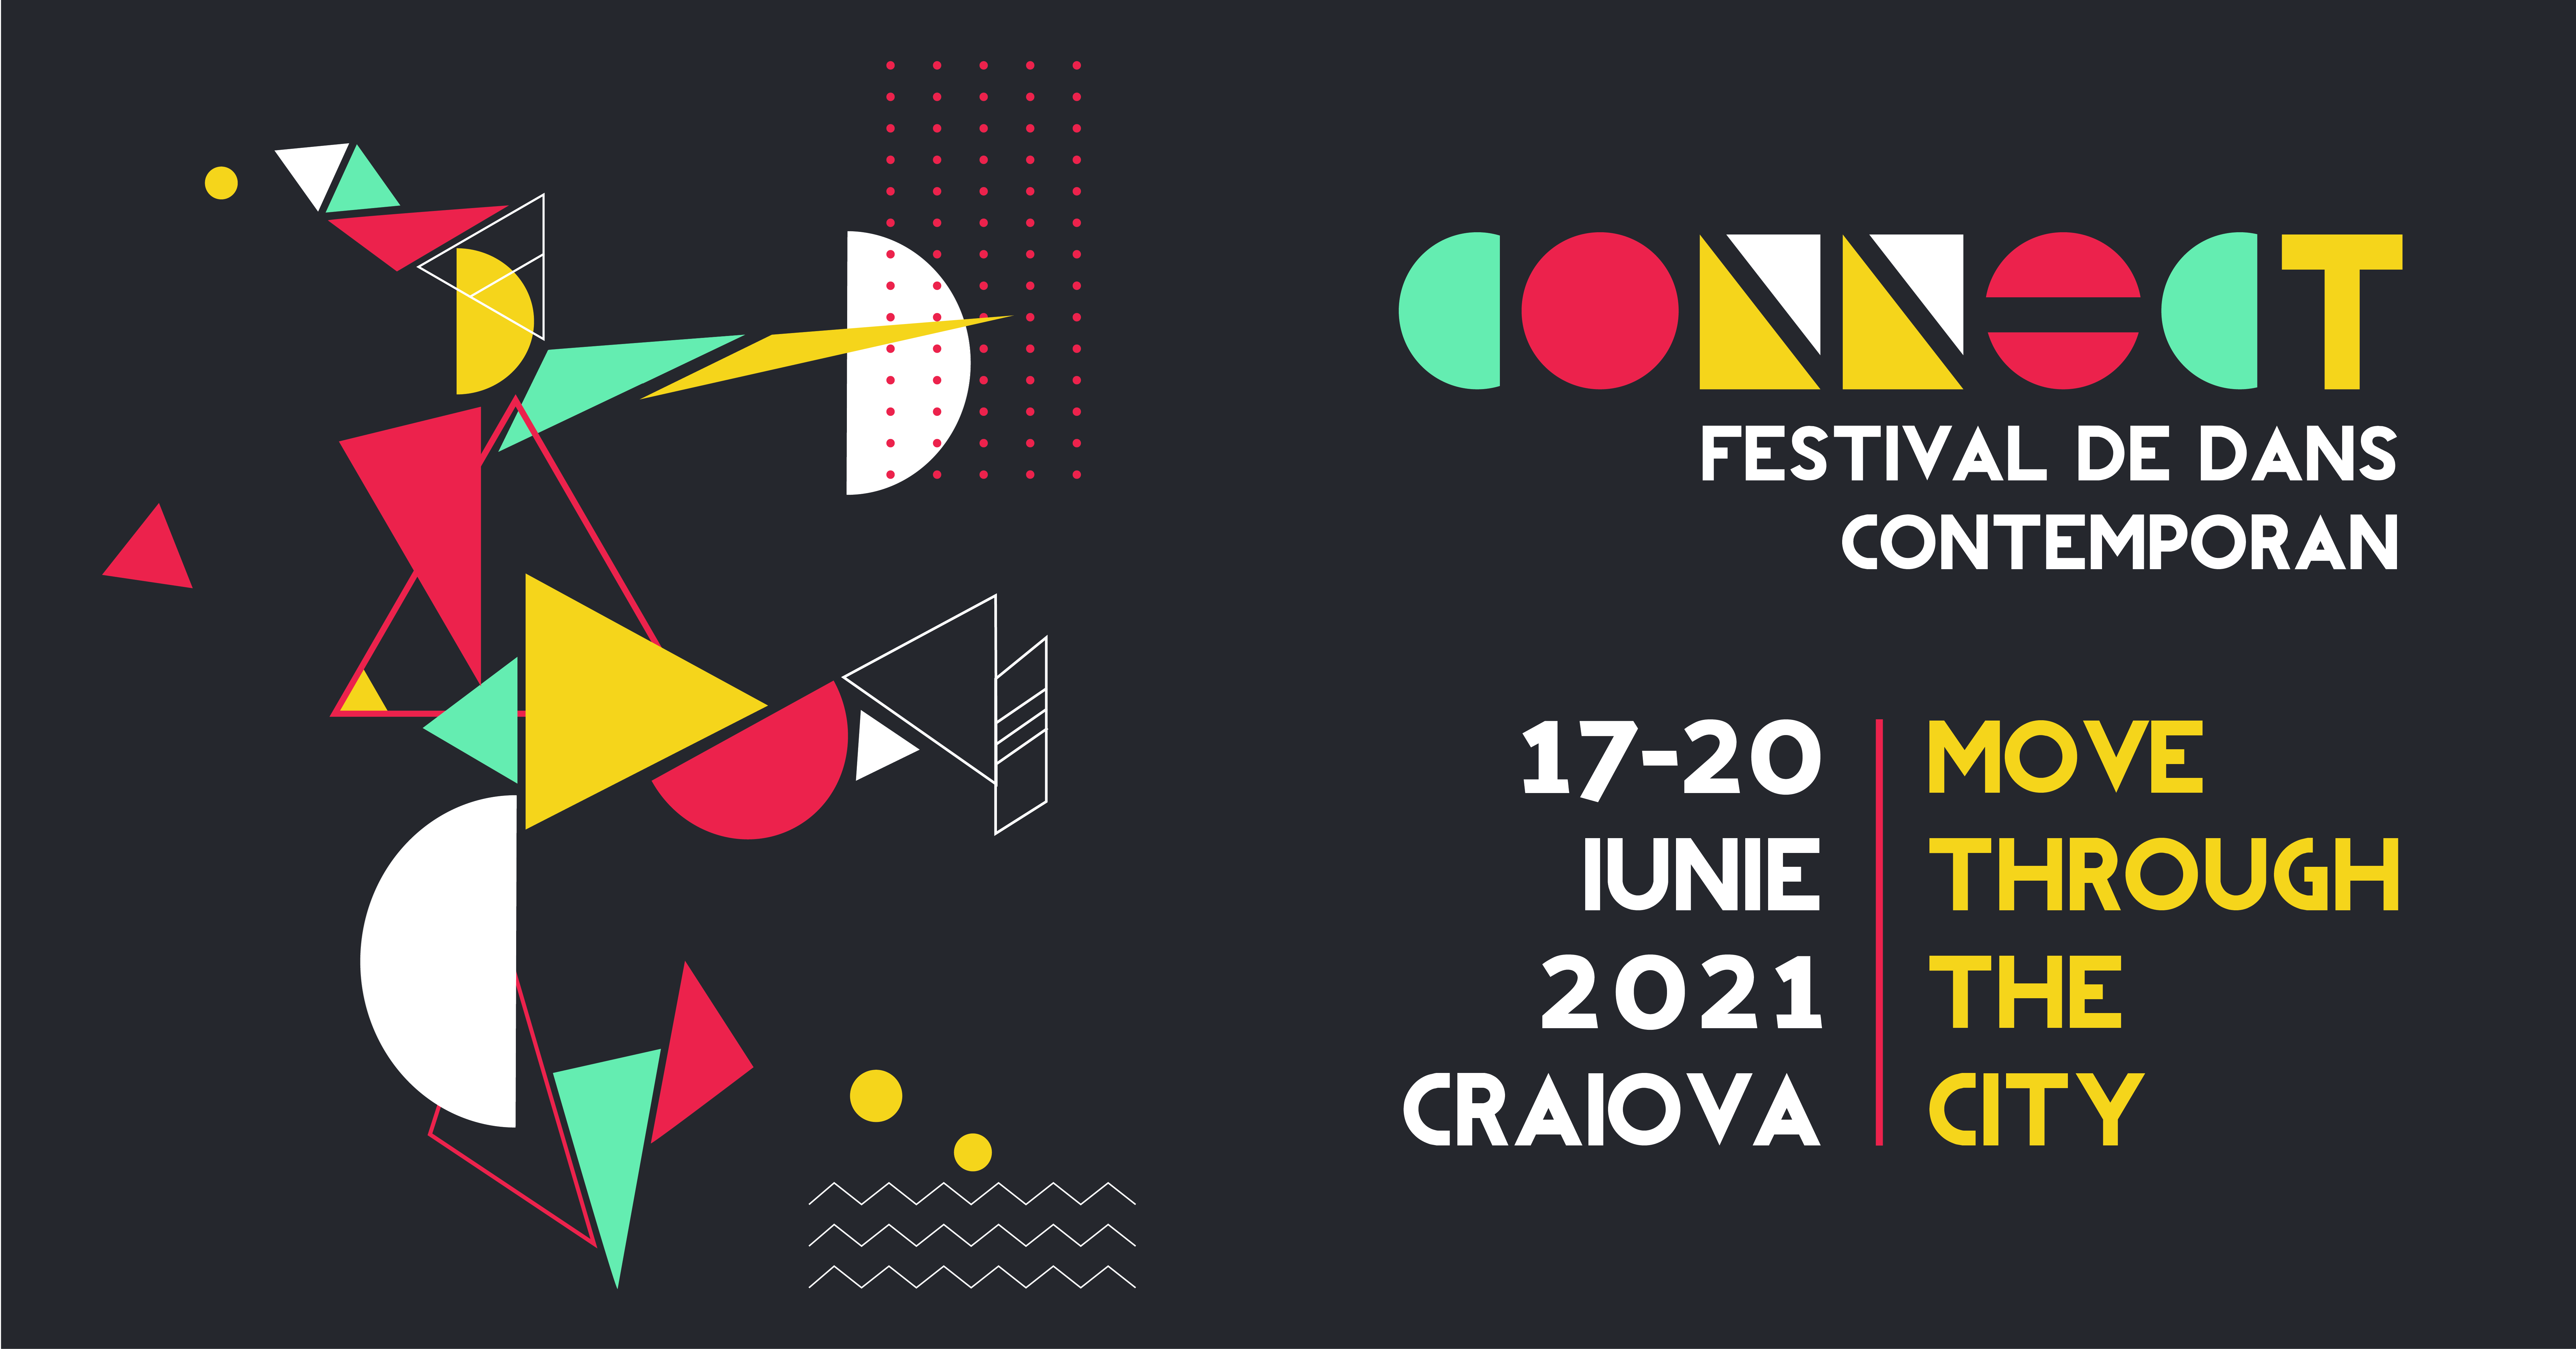 The EcoFest and the Contemporary Dance Connect Festival welcome the summer in Craiova